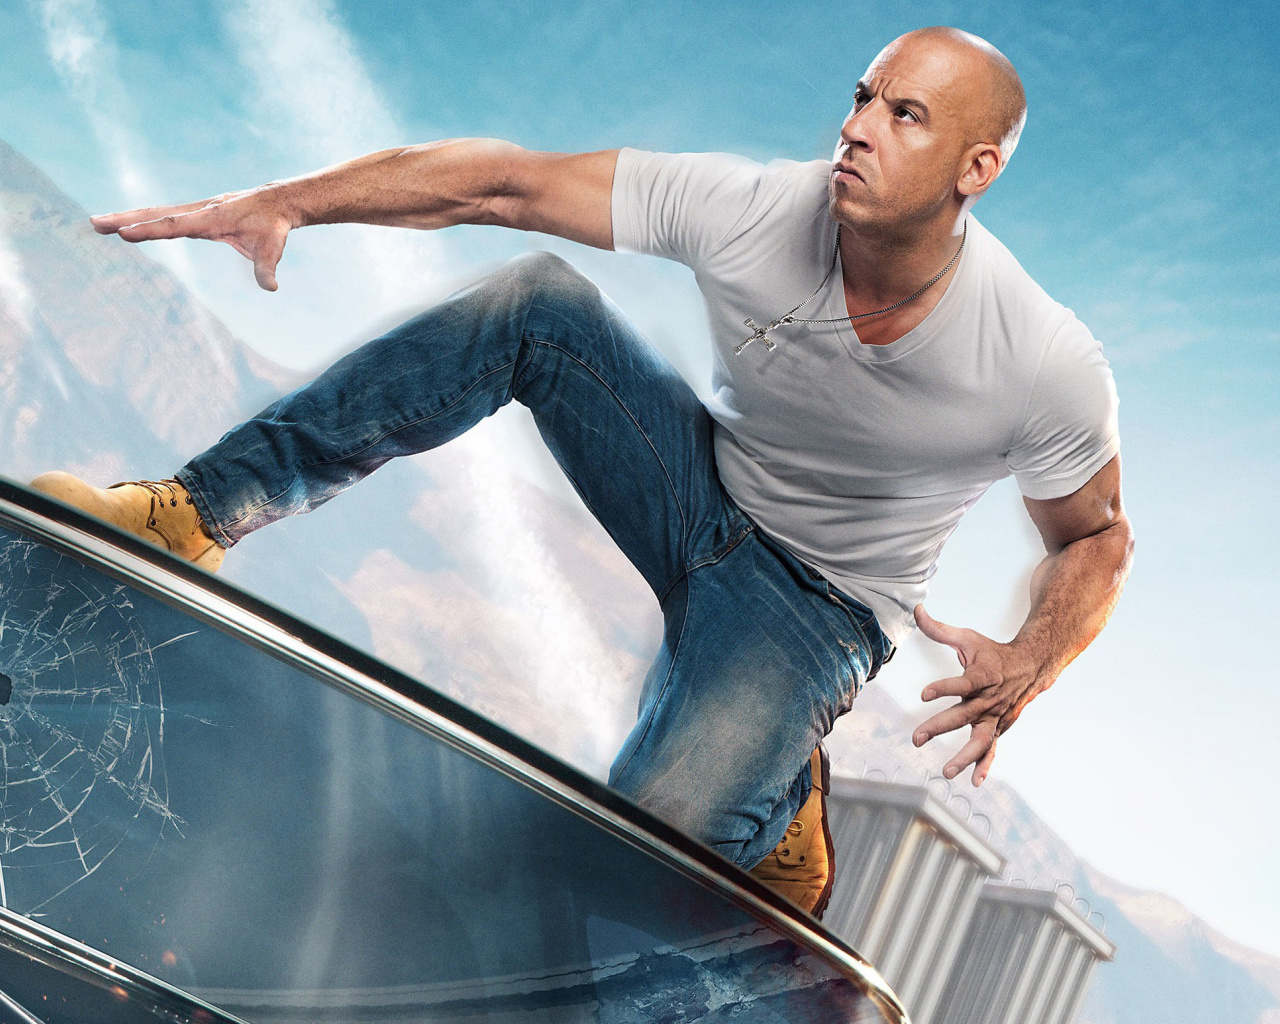 Fast & Furious Supercharged Poster with Vin Diesel wallpaper 1280x1024